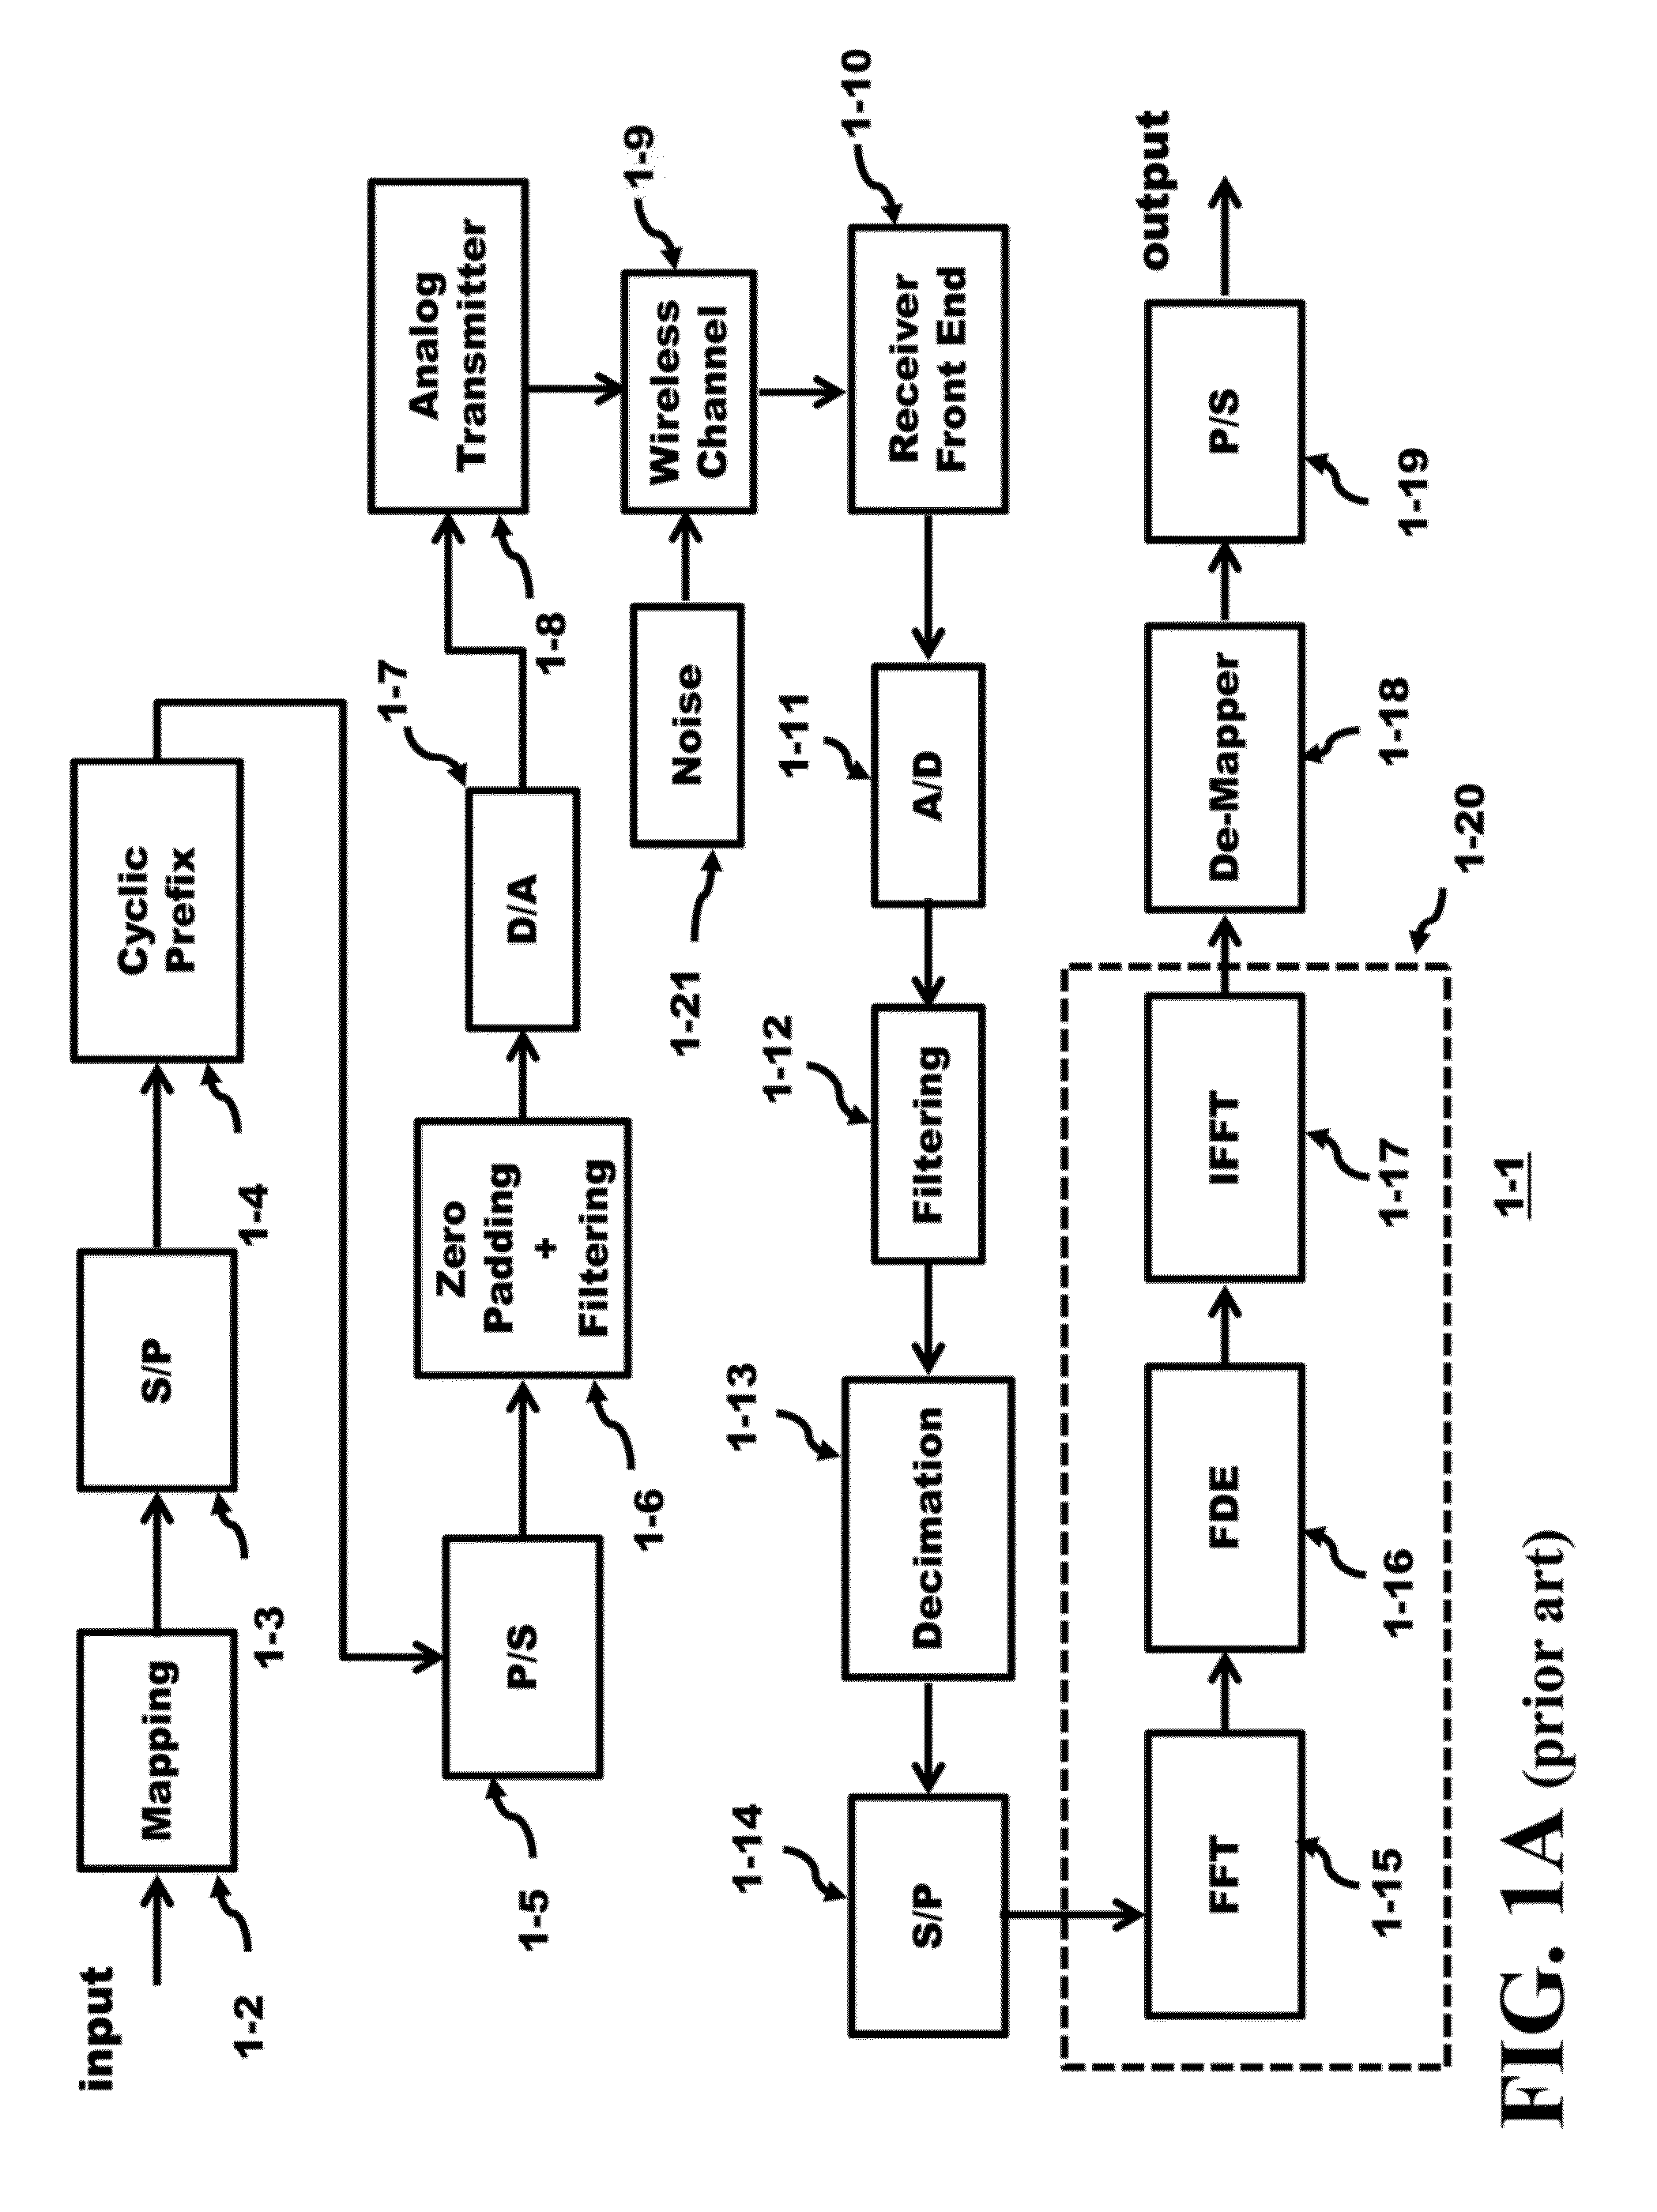 Method and apparatus of an architecture to switch equalization based on signal delay spread